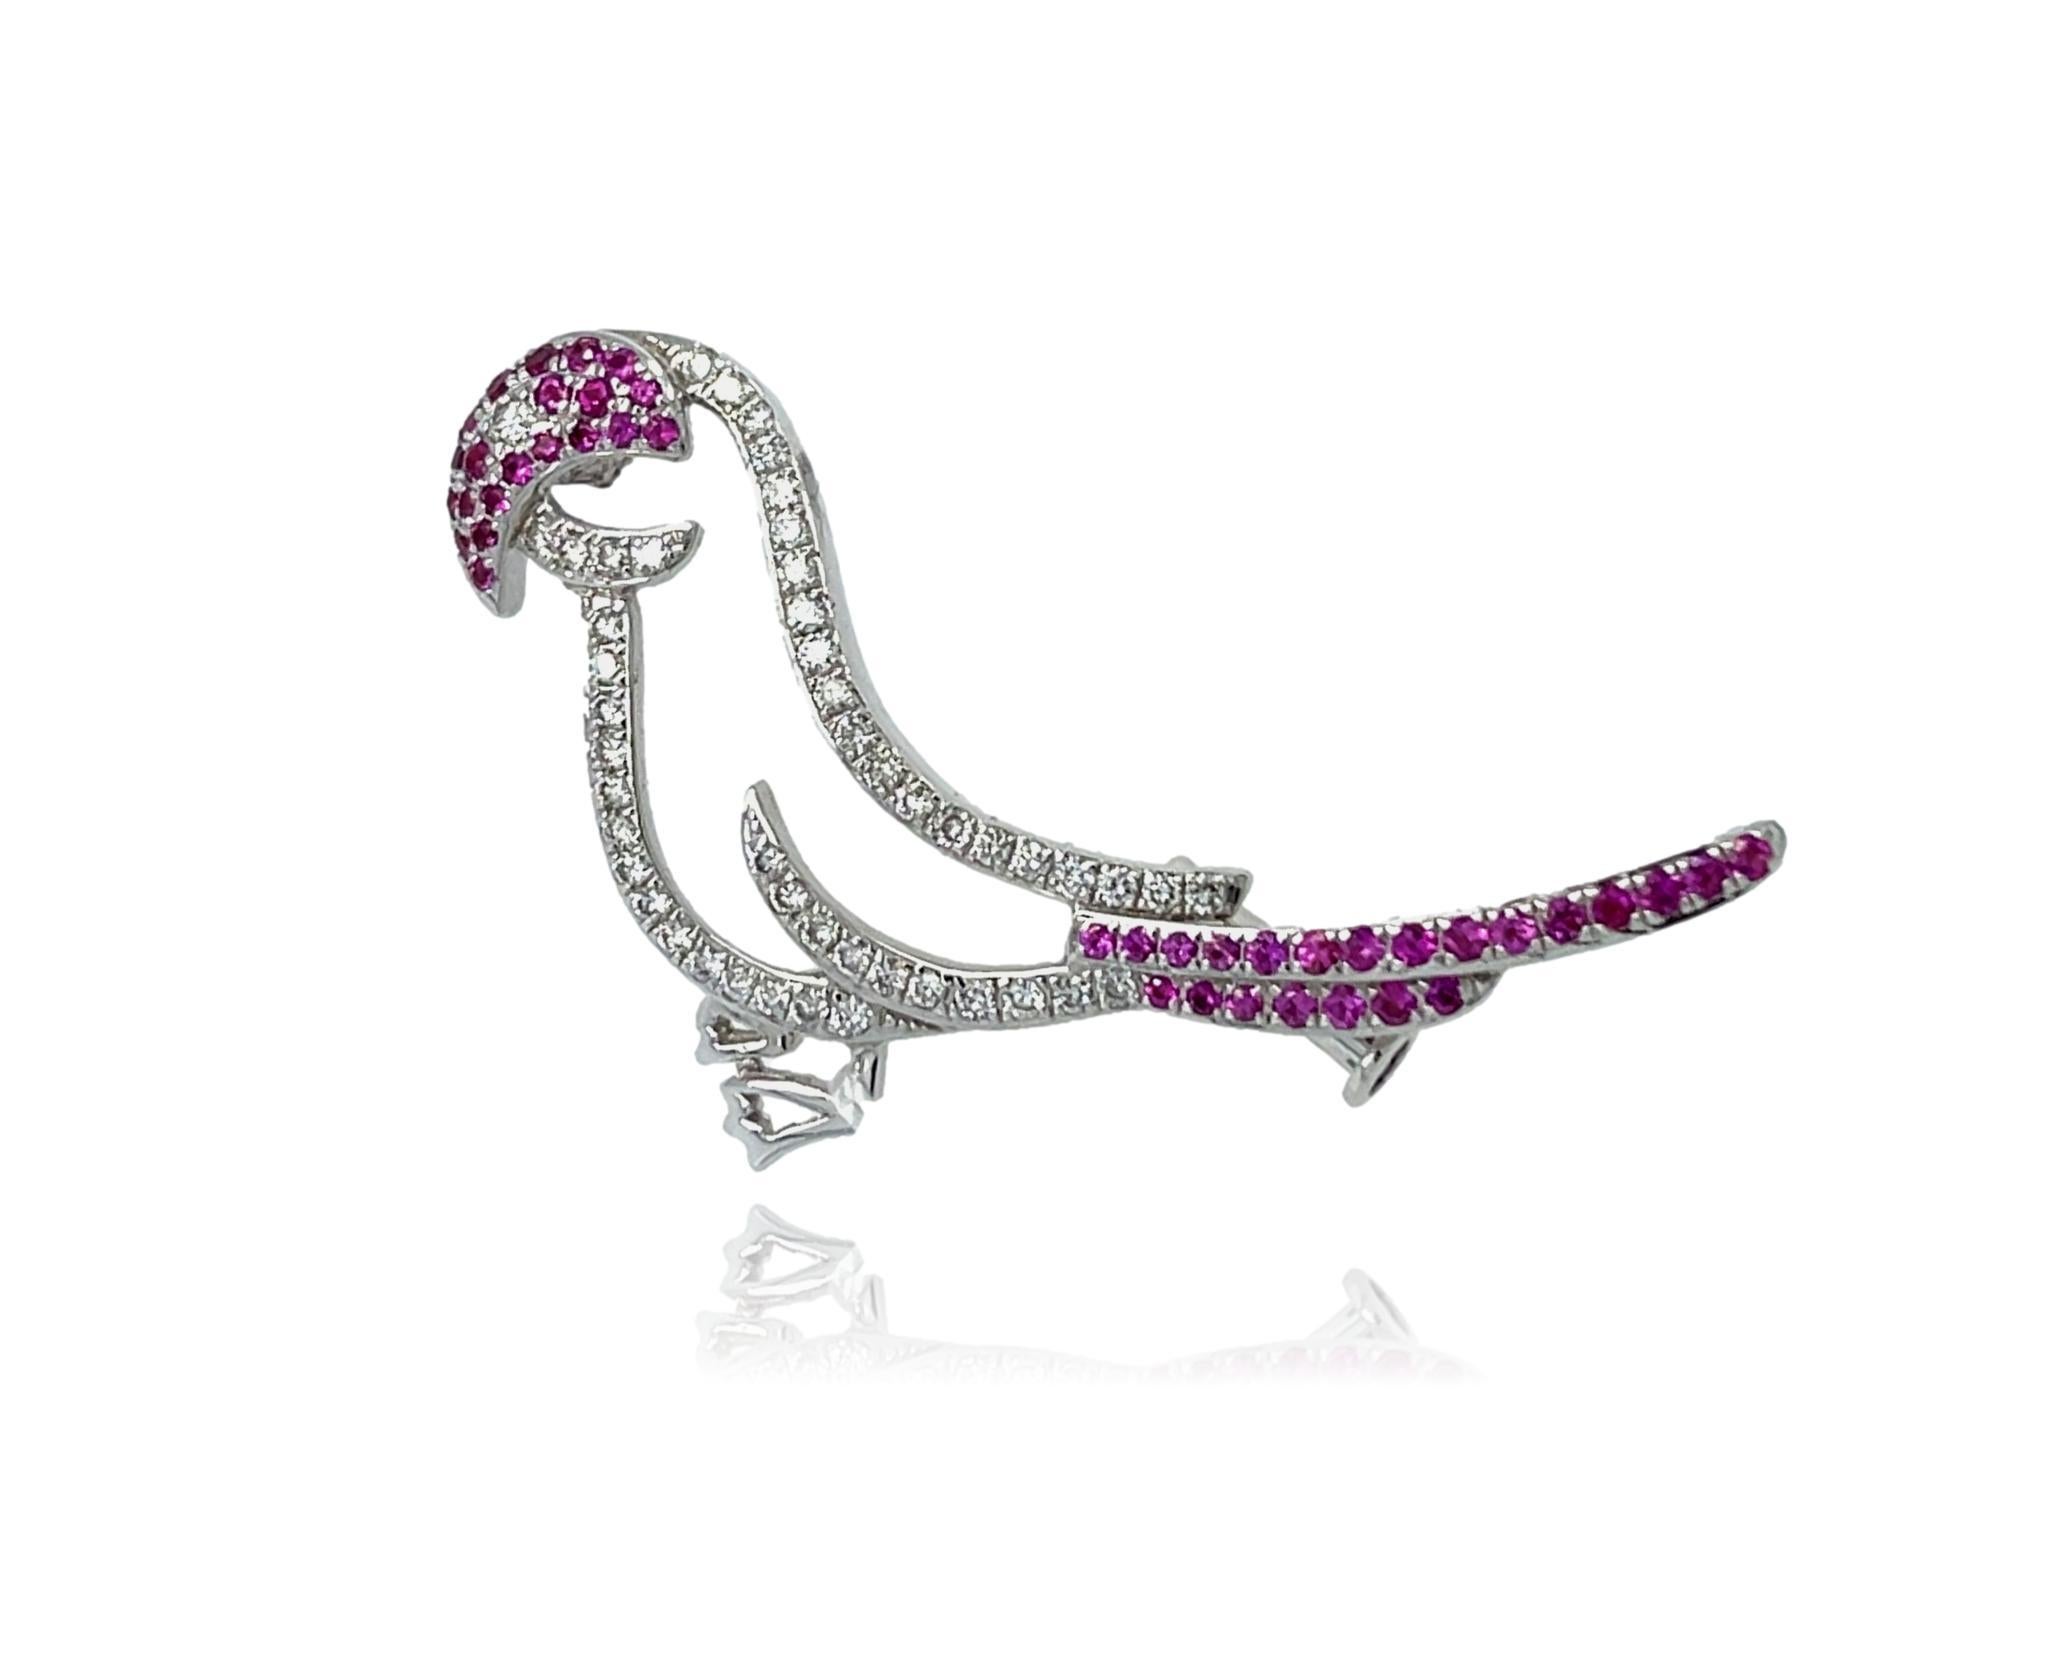 This stunning Bird Brooch is the perfect accent to wear at that cocktail event. It has sparkling diamonds and beautiful top quality Pink Sapphires all set in 18K white gold. It has a pull lock for extra security. This brooch comes in a beautiful box